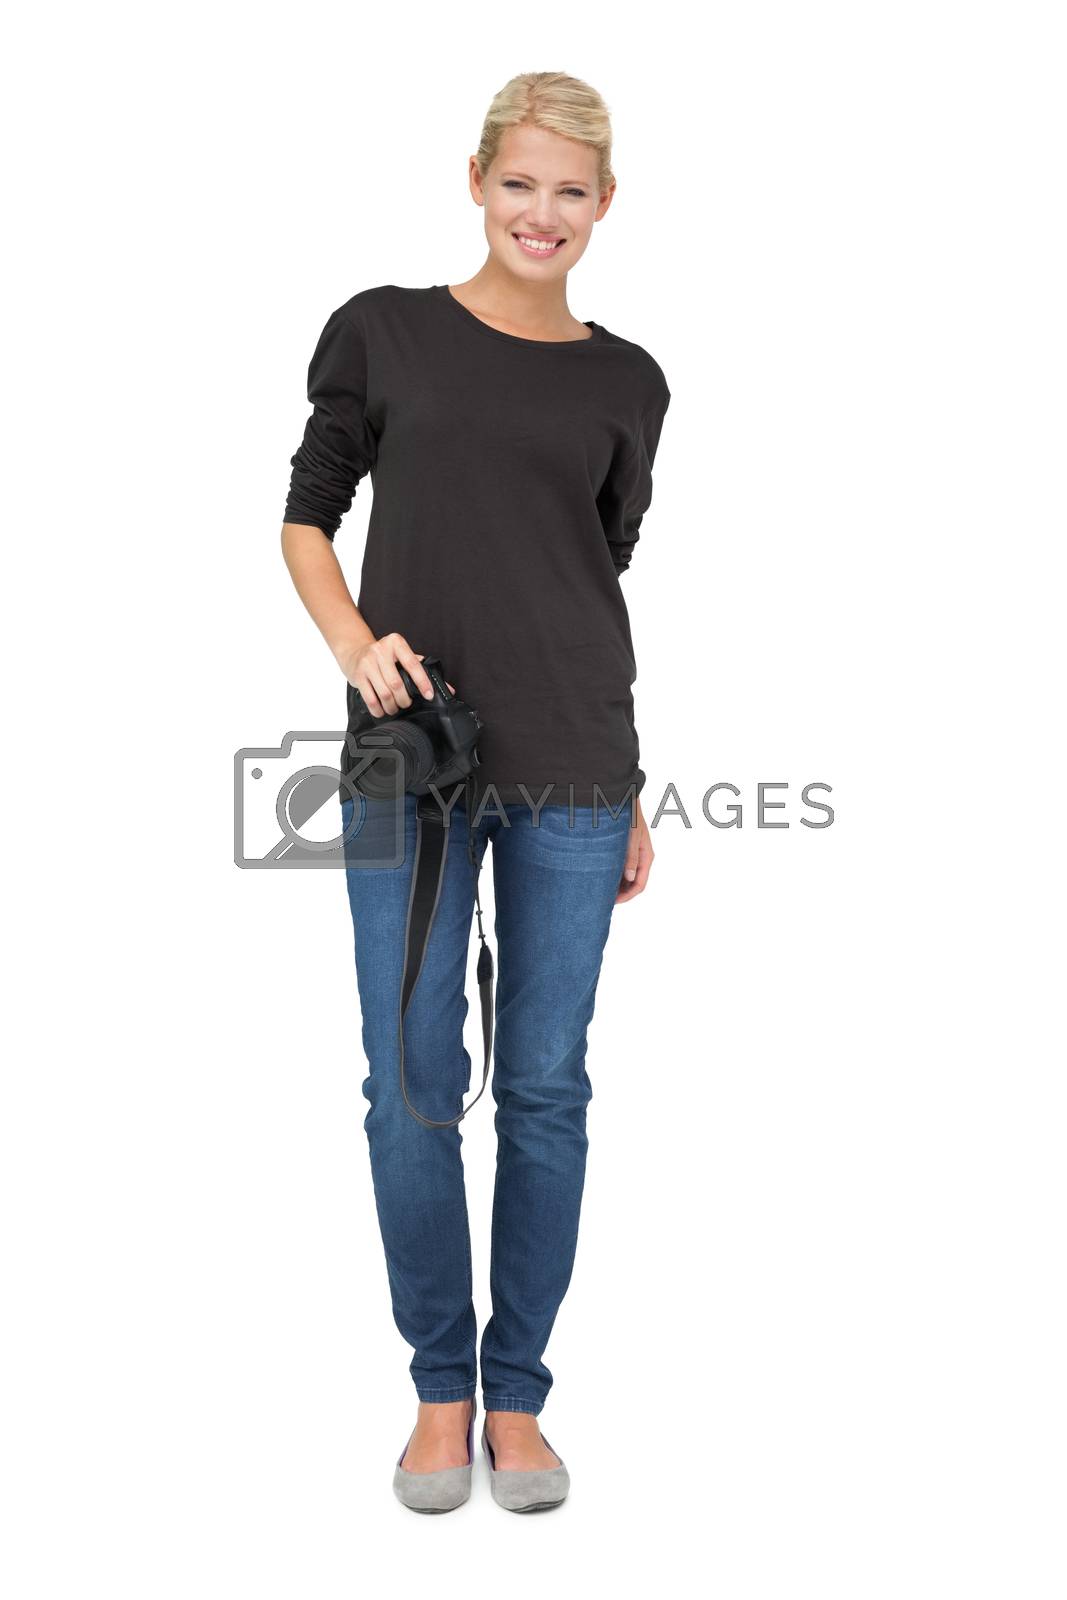 Royalty free image of Full length portrait of a female photographer by Wavebreakmedia